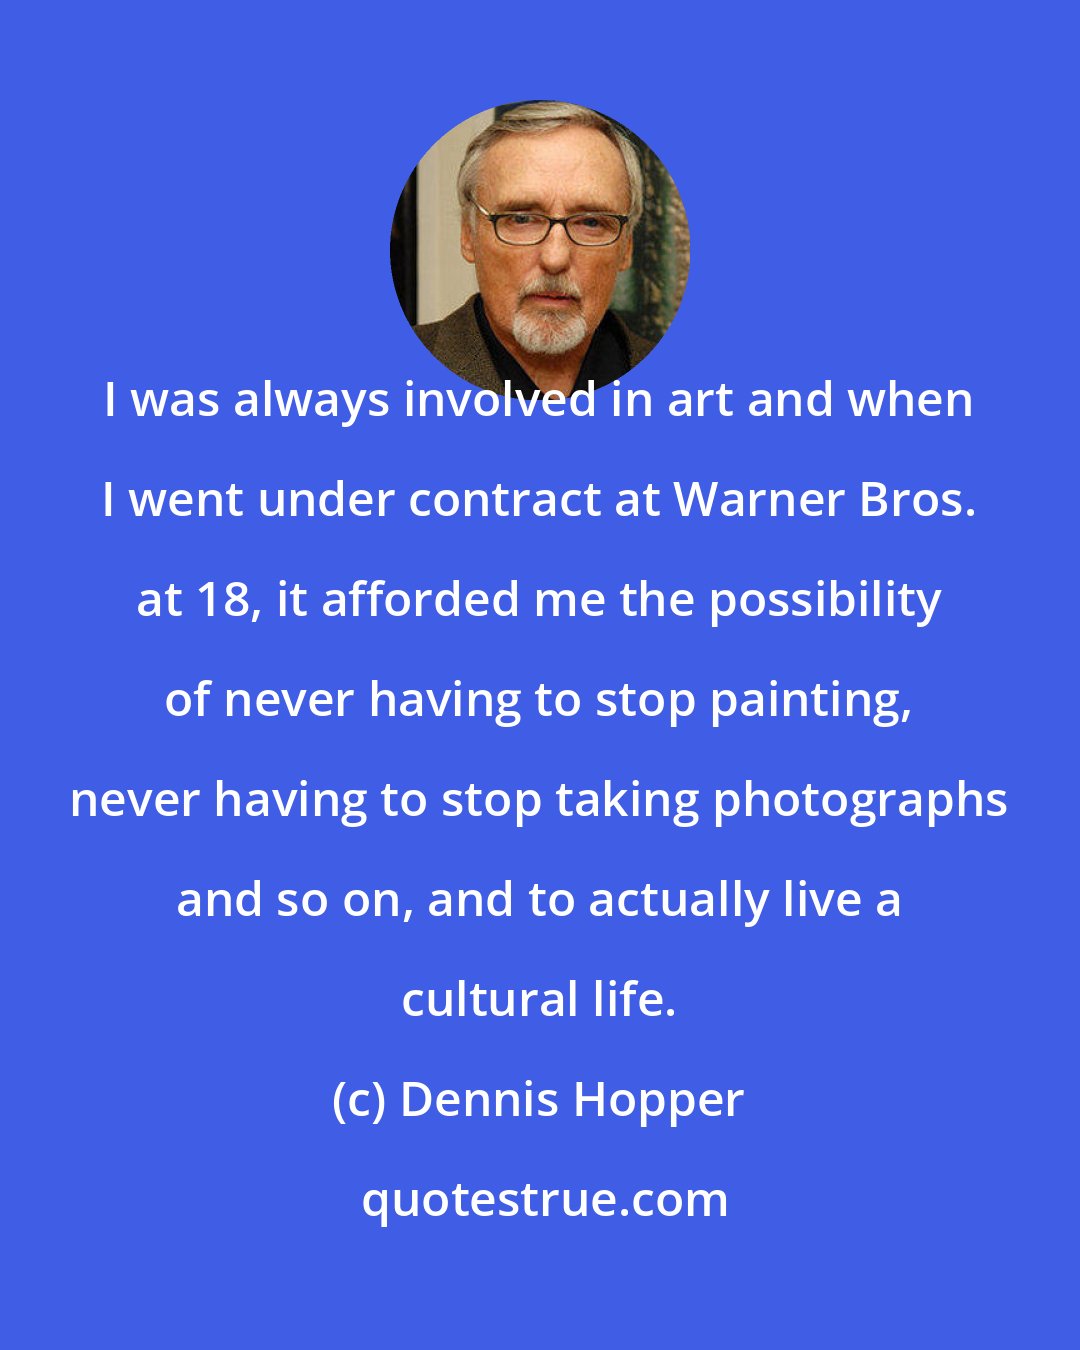 Dennis Hopper: I was always involved in art and when I went under contract at Warner Bros. at 18, it afforded me the possibility of never having to stop painting, never having to stop taking photographs and so on, and to actually live a cultural life.